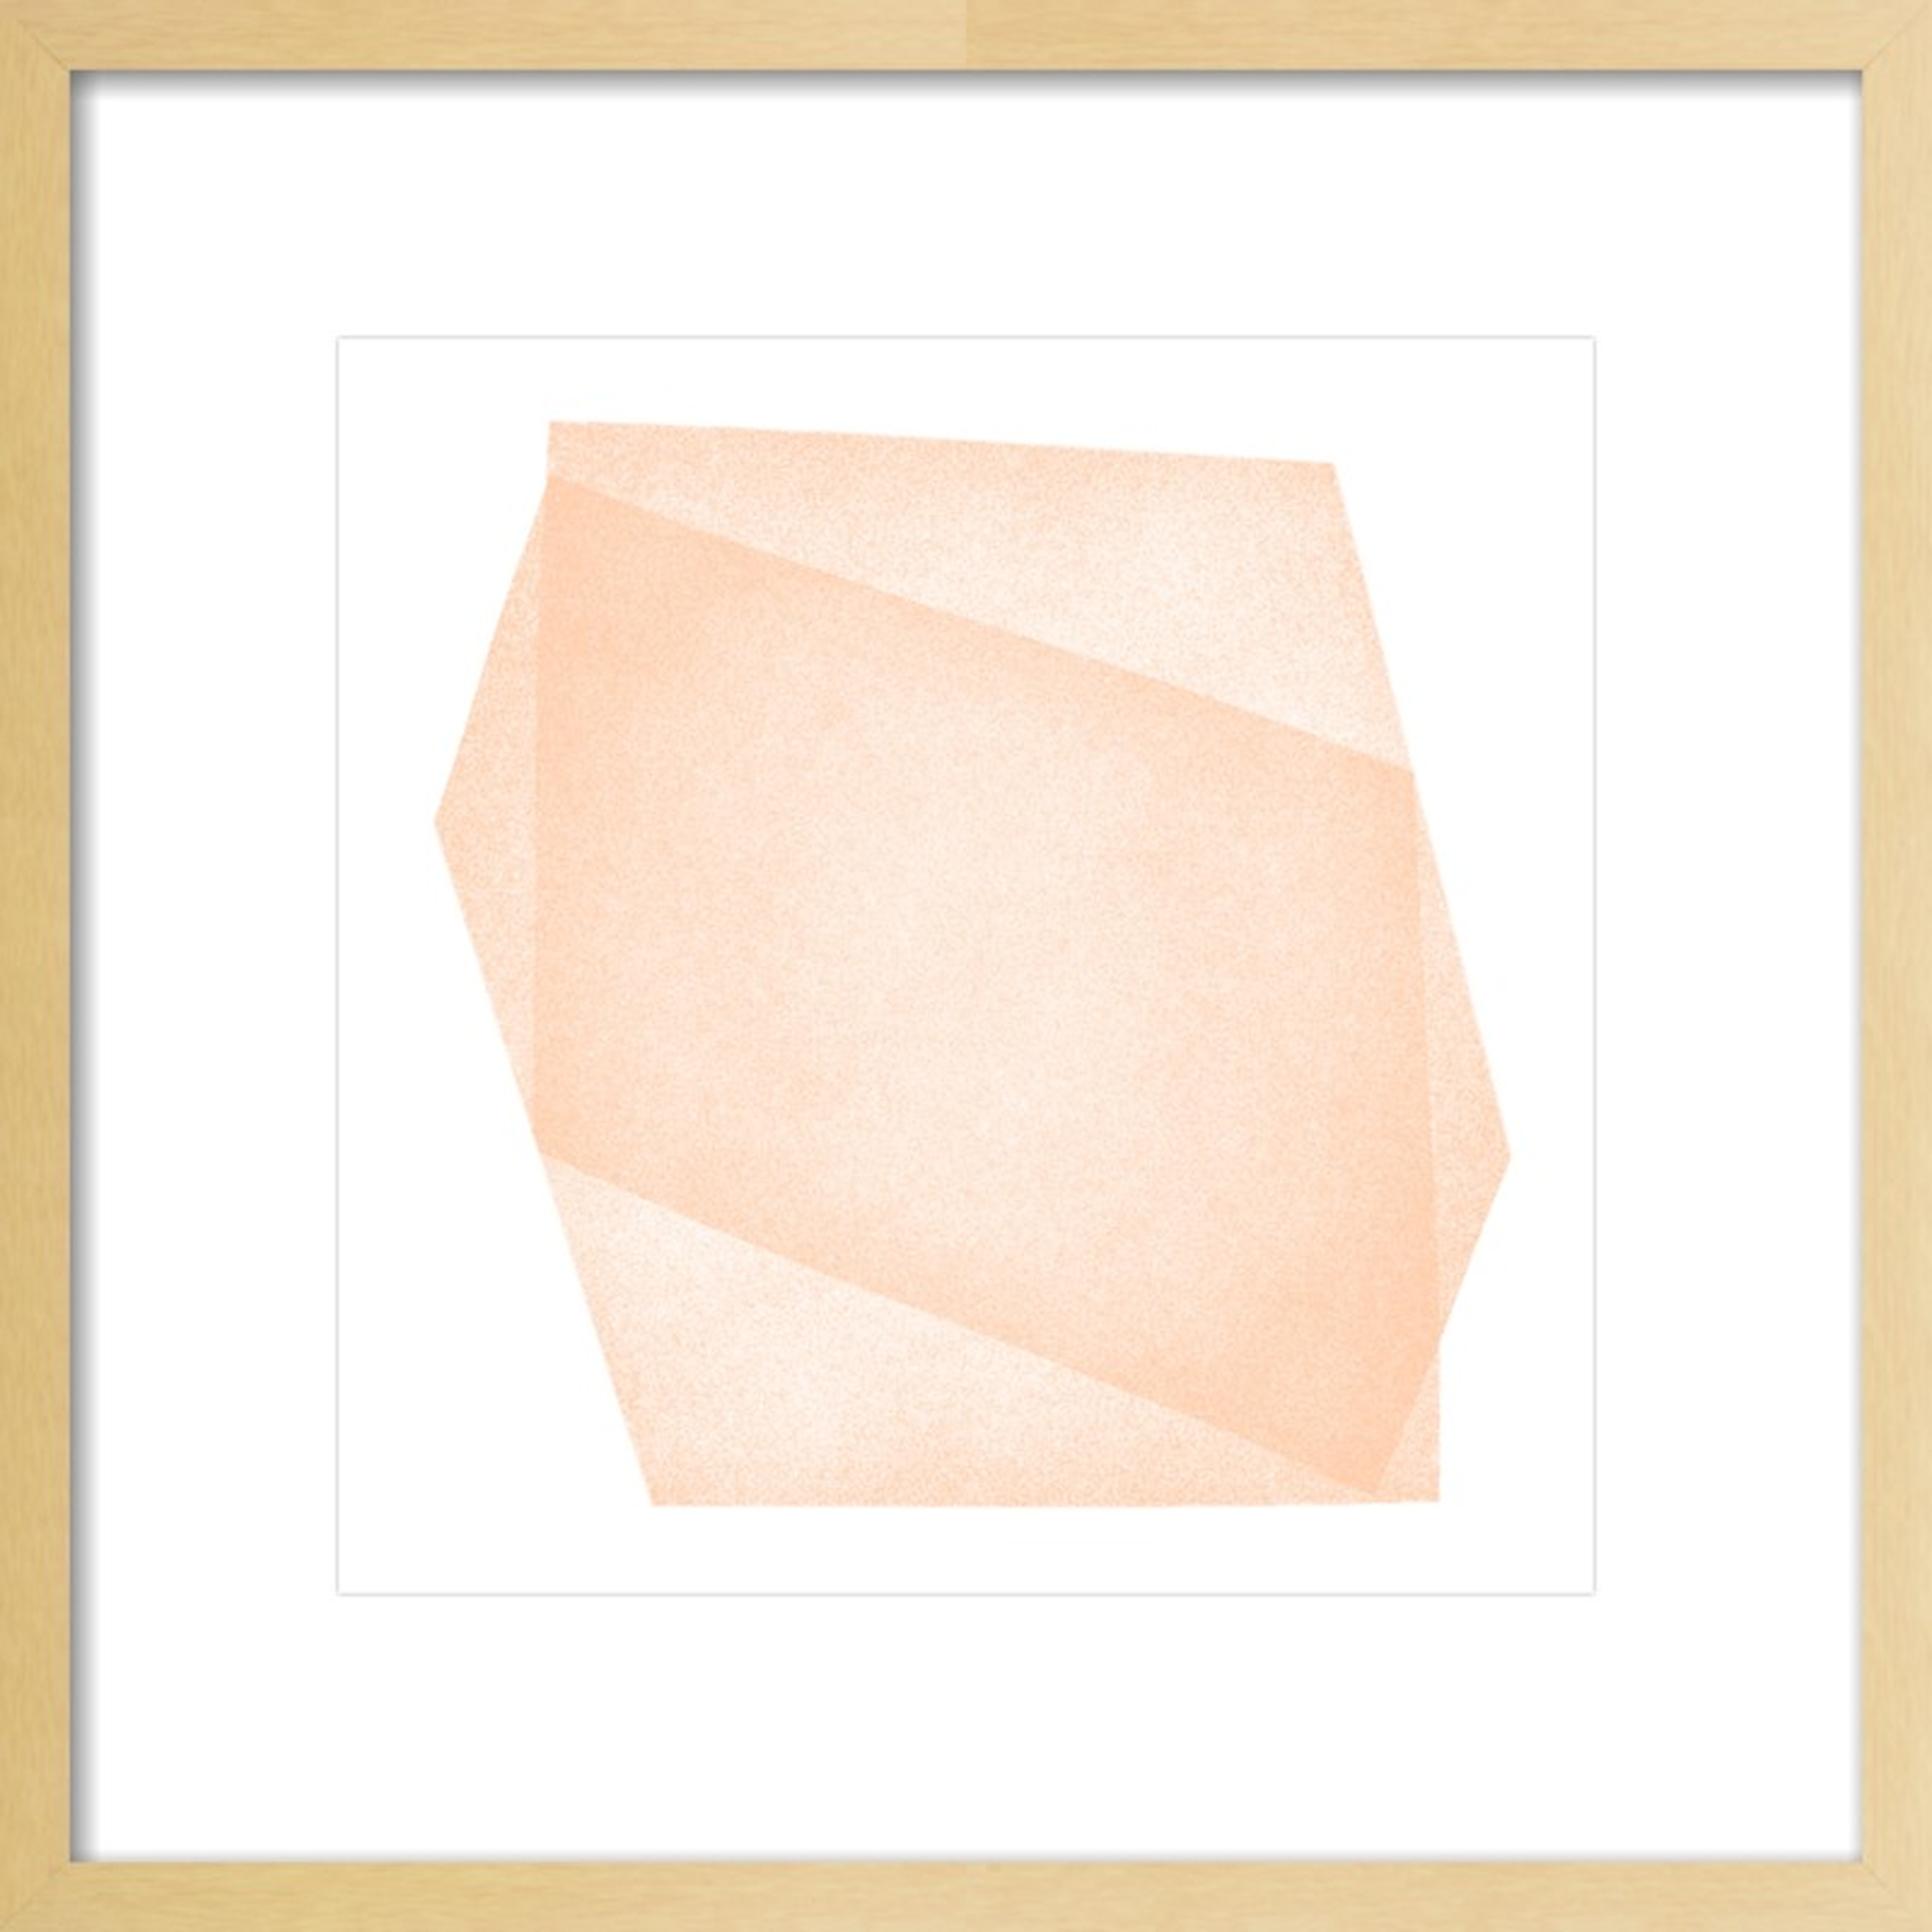 Pale Peach Structure: Soft Geometry by Jessica Poundstone - Artfully Walls